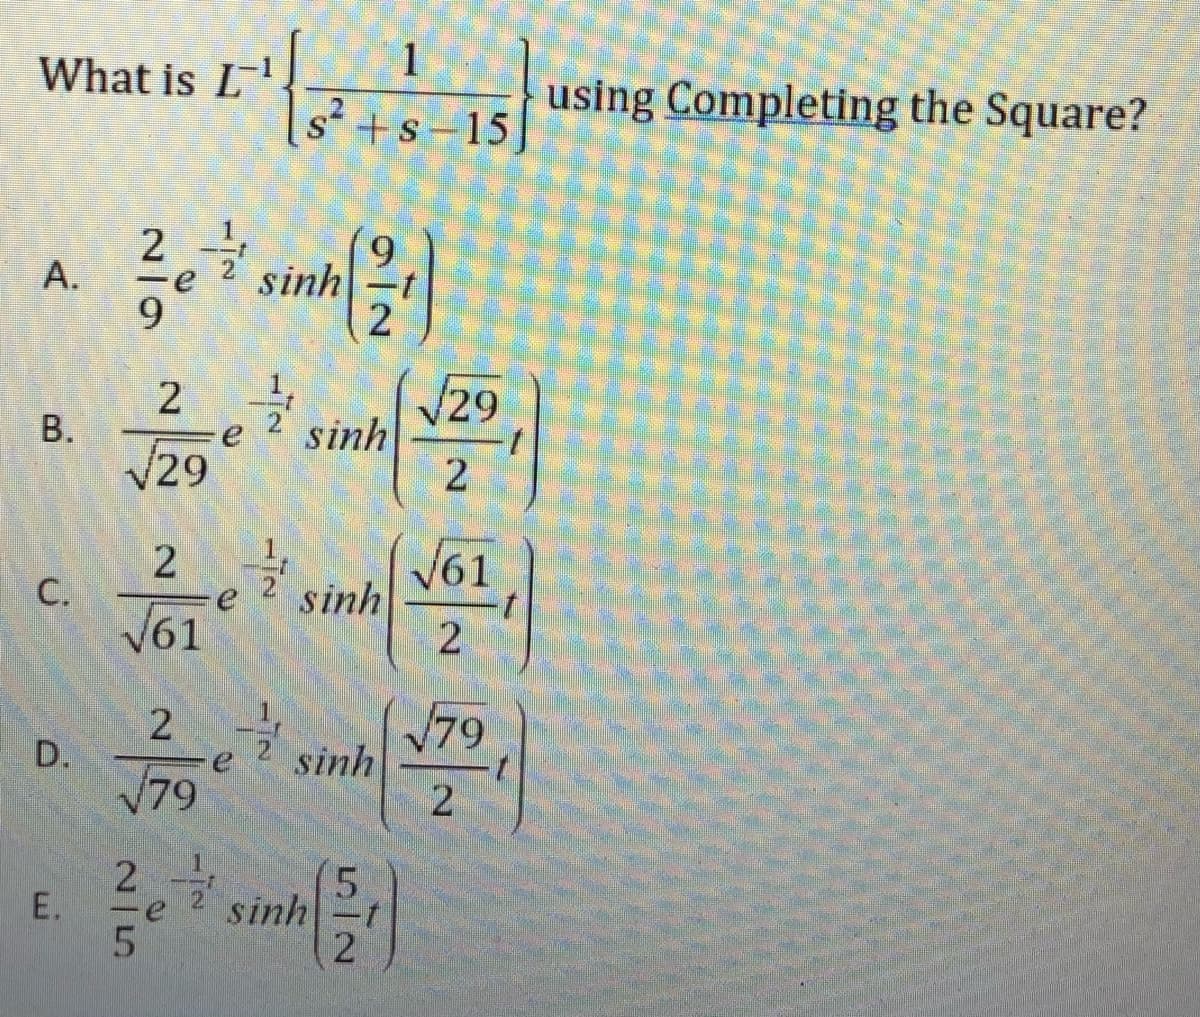 What is L-
1
using Completing the Square?
s +s-15
2
9.
sinh
9
29
sinh
V29
2
V61
sinh
С.
V61
2
V79
sinh
79
2
5.
sinh
E.
-e
2.
2.
2.
A,
B.
D.
